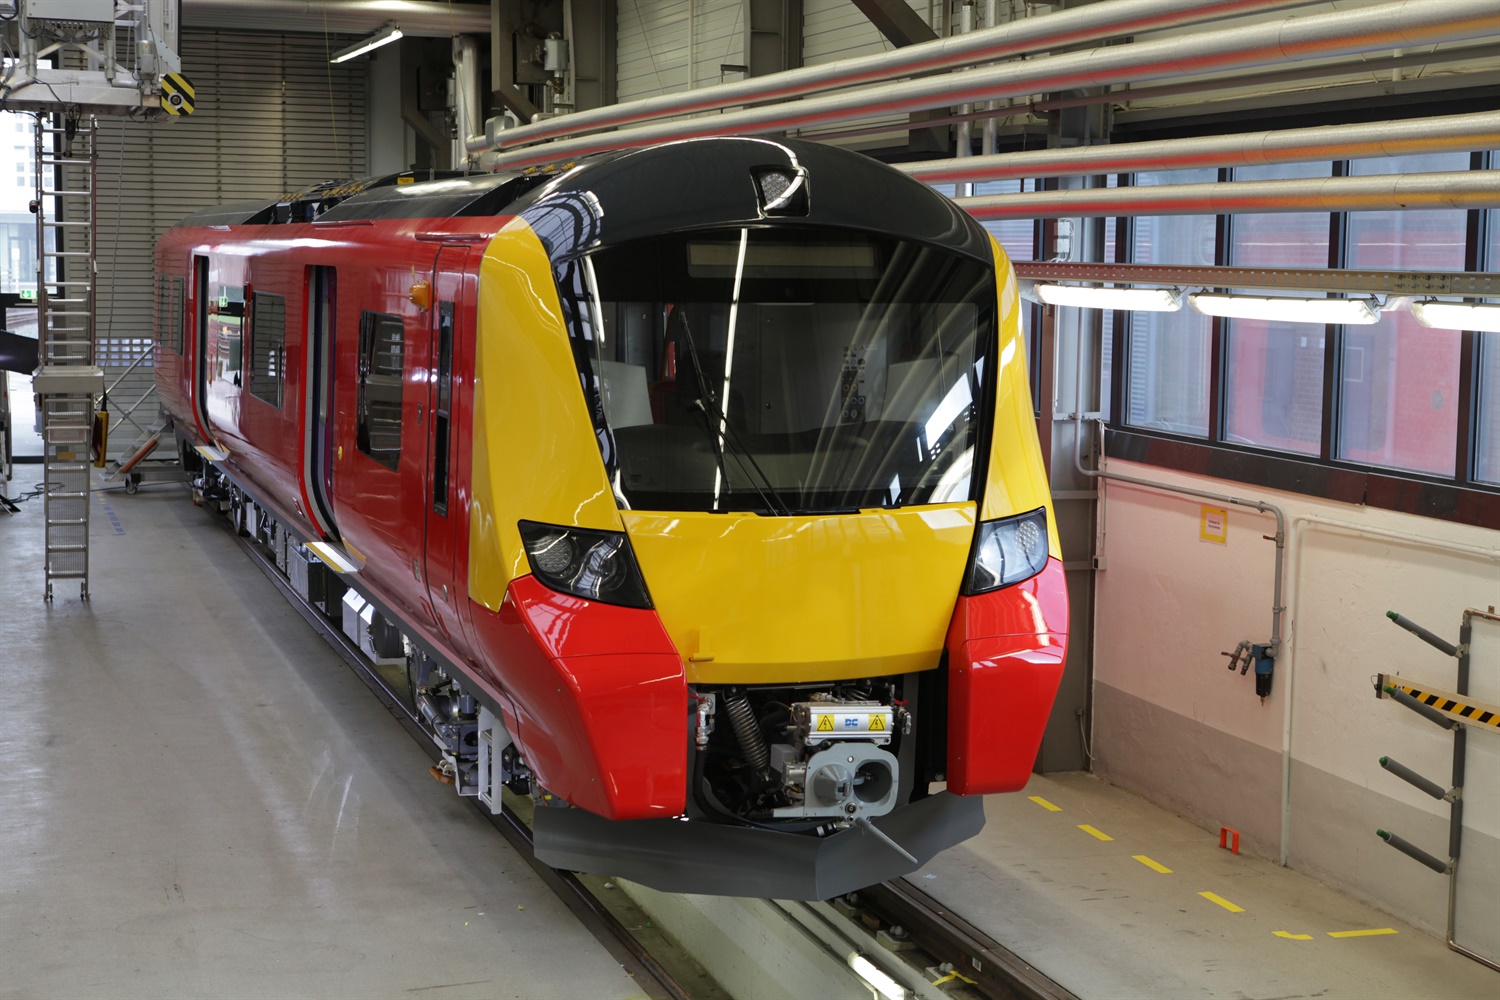 RMT slams ‘crazy’ First MTR decision to drop new £200m SWT trains